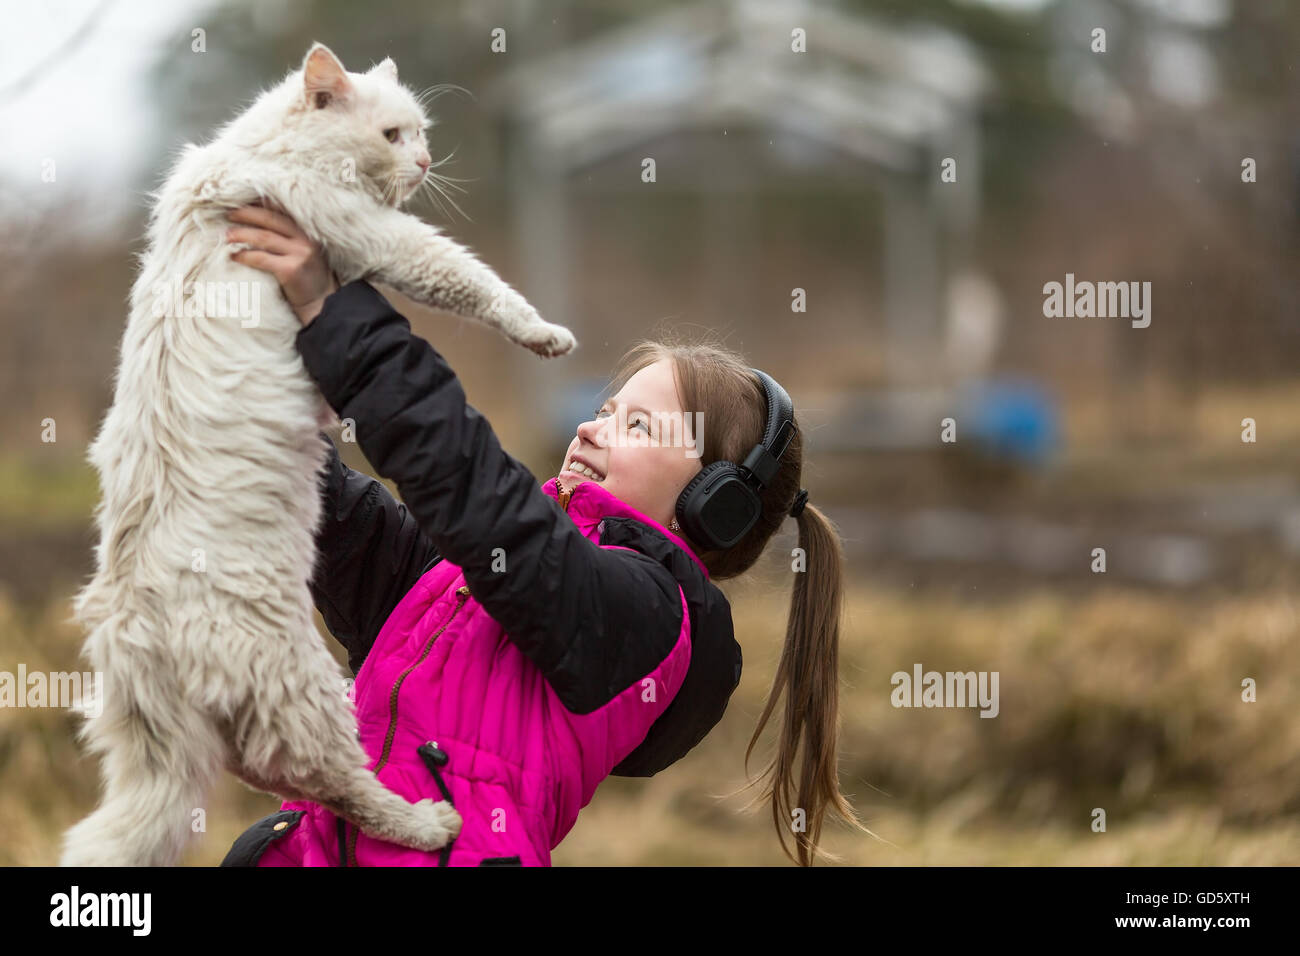 A little naughty girl in headphones playing with the cat. Stock Photo